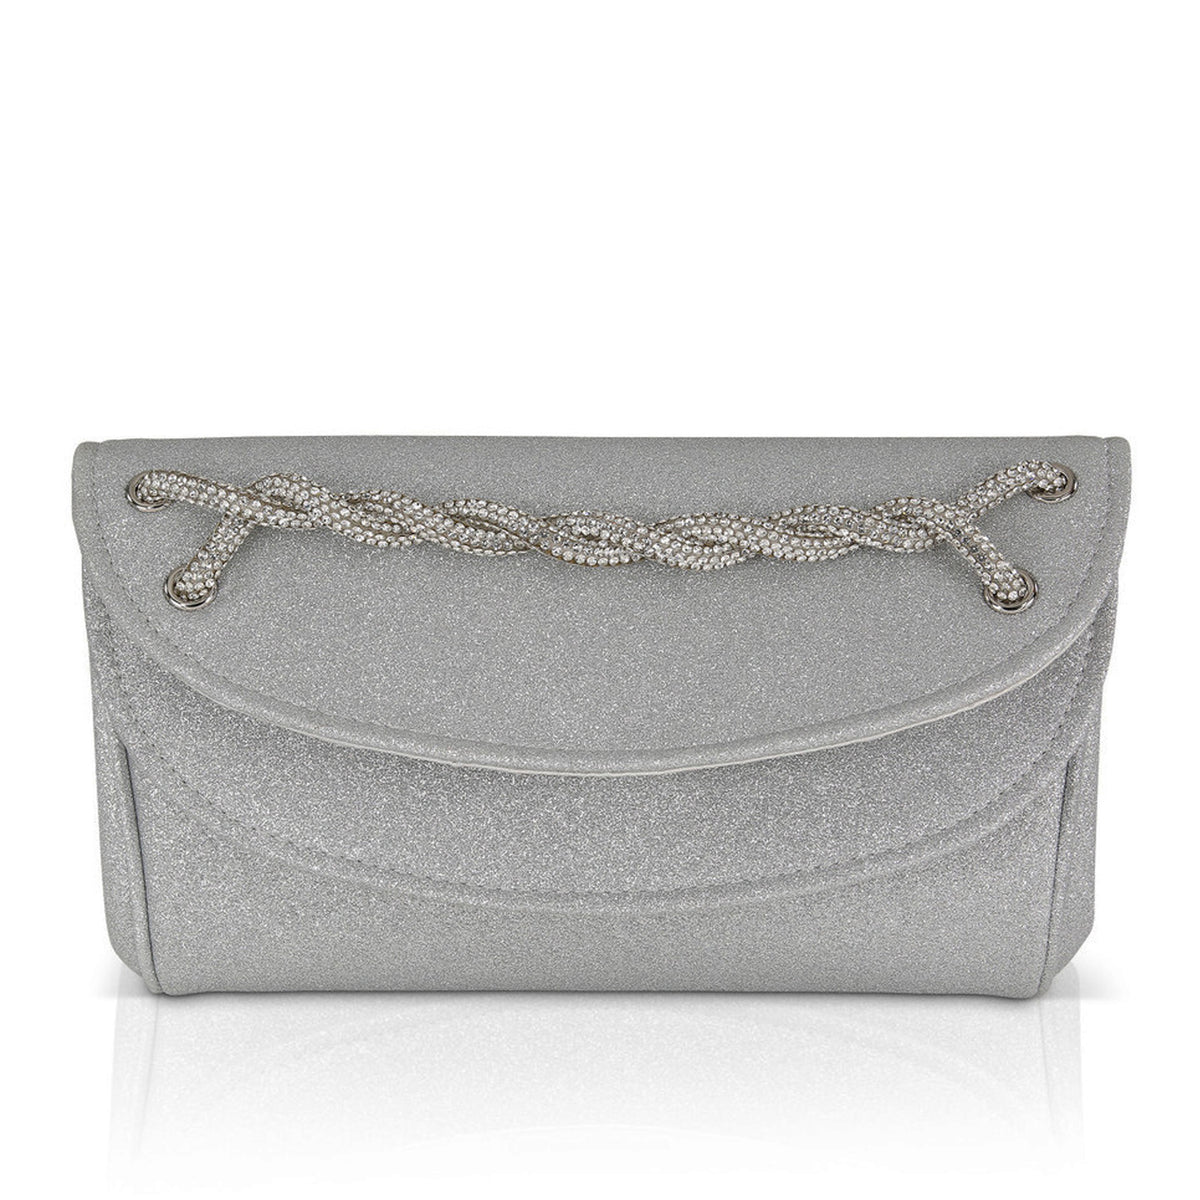 Jewel Smile Clutch With Pave Crystal Hand Strap